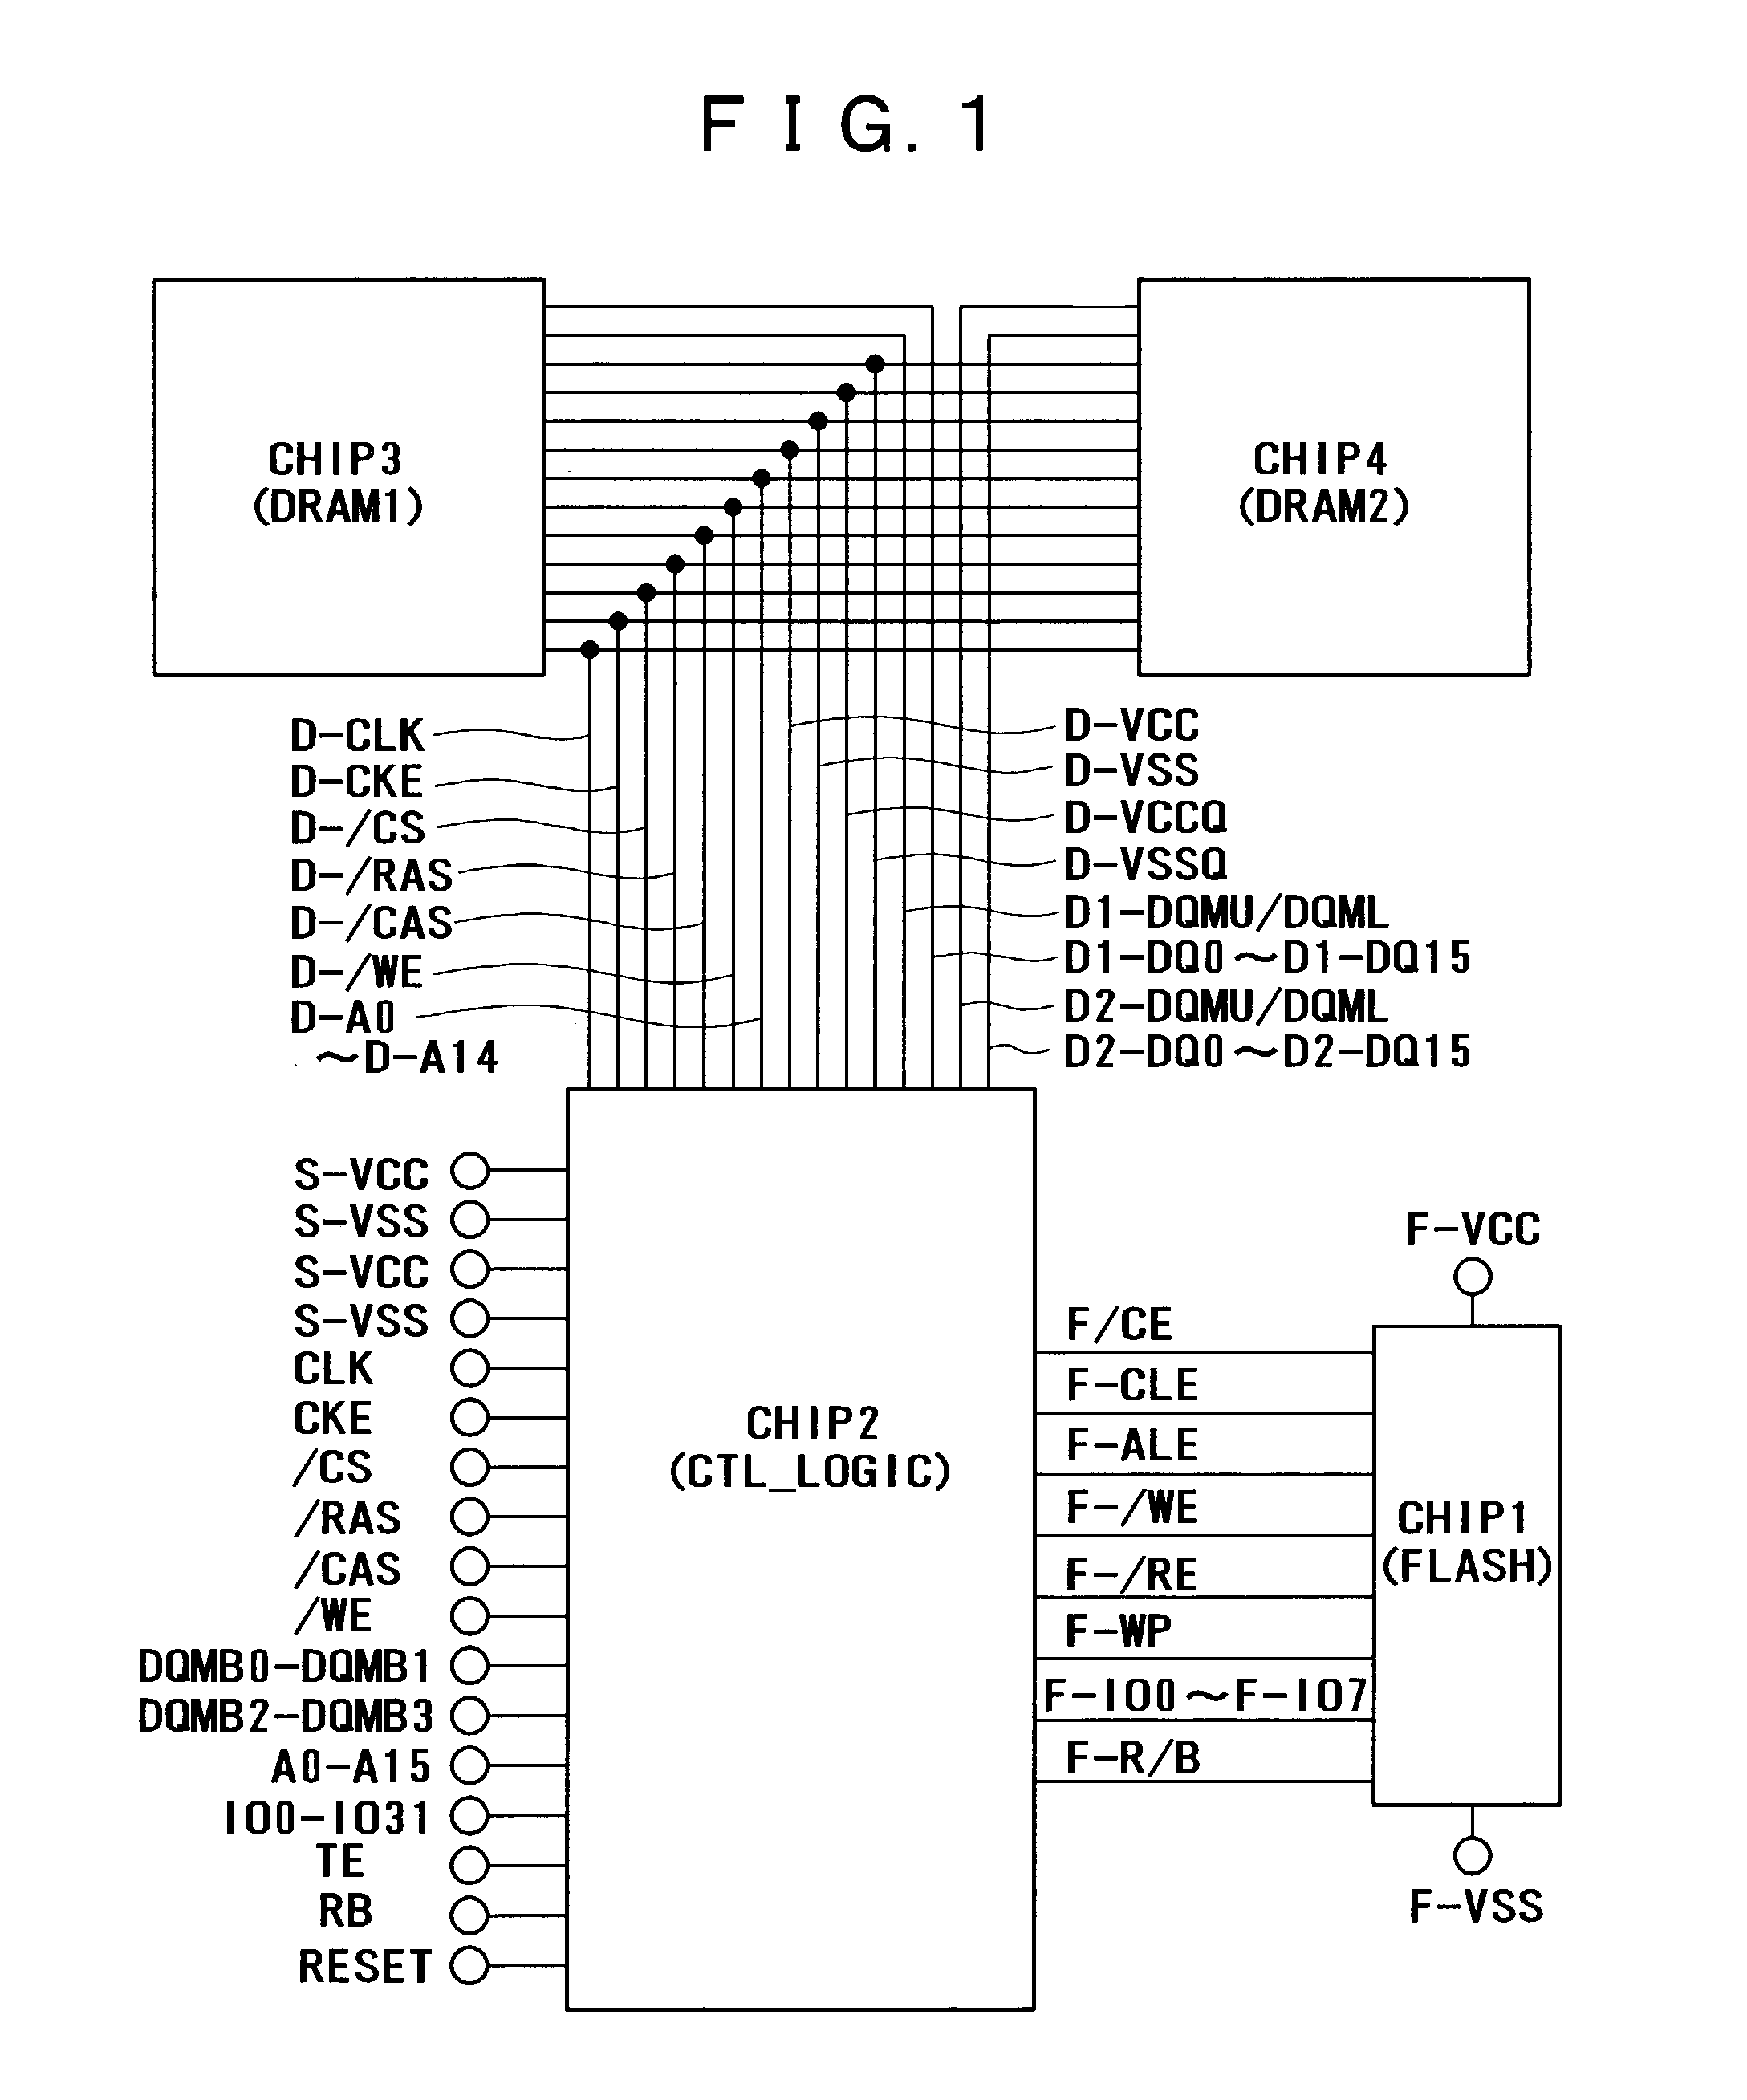 System and method for using dynamic random access memory and flash memory